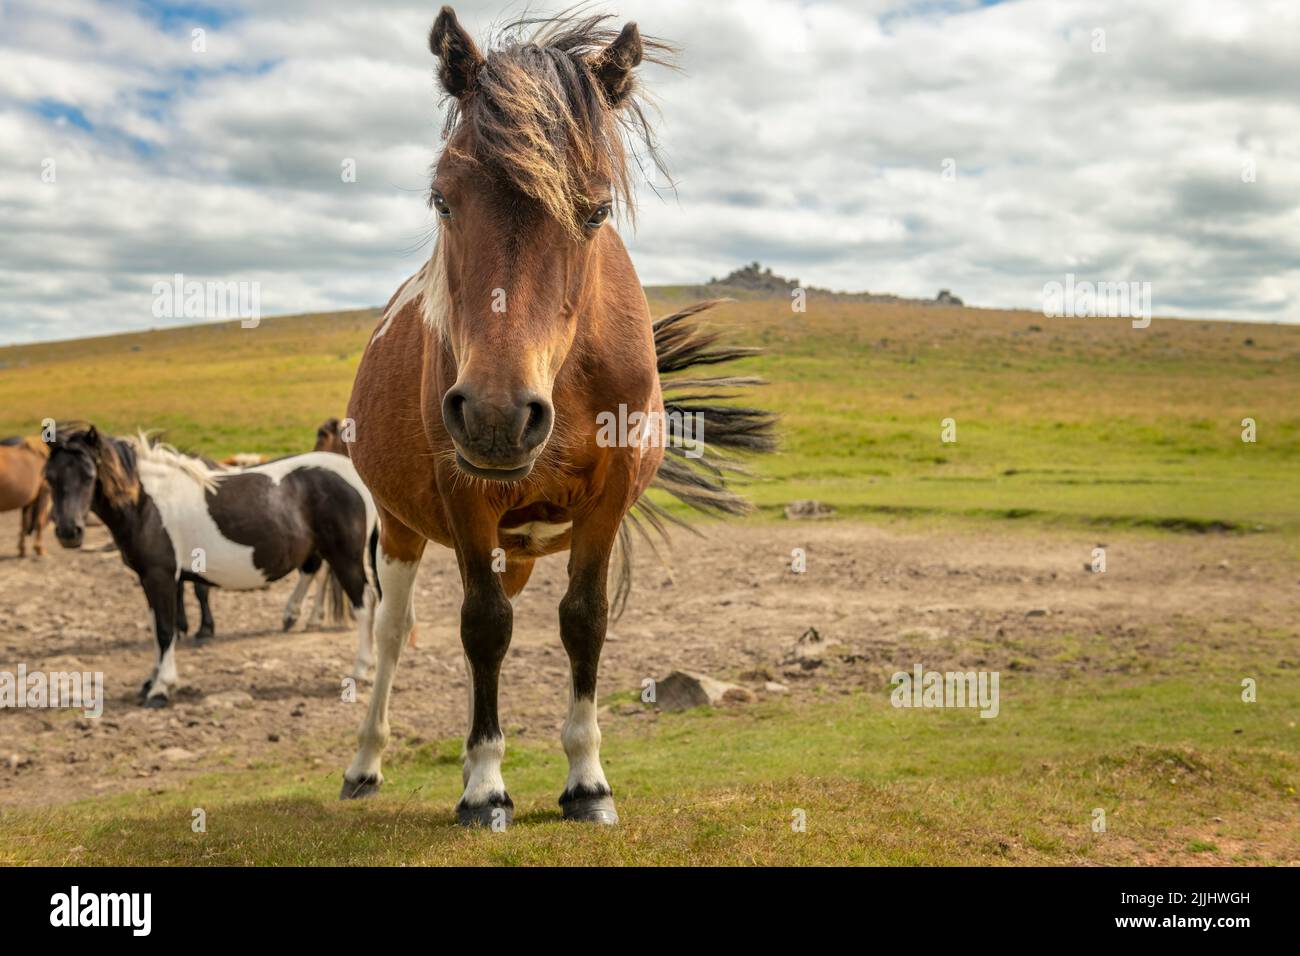 The Dartmoor pony is a breed that is native to the British Isles. They can be found roaming the moorlands of Dartmoor National Park in Devon. Stock Photo